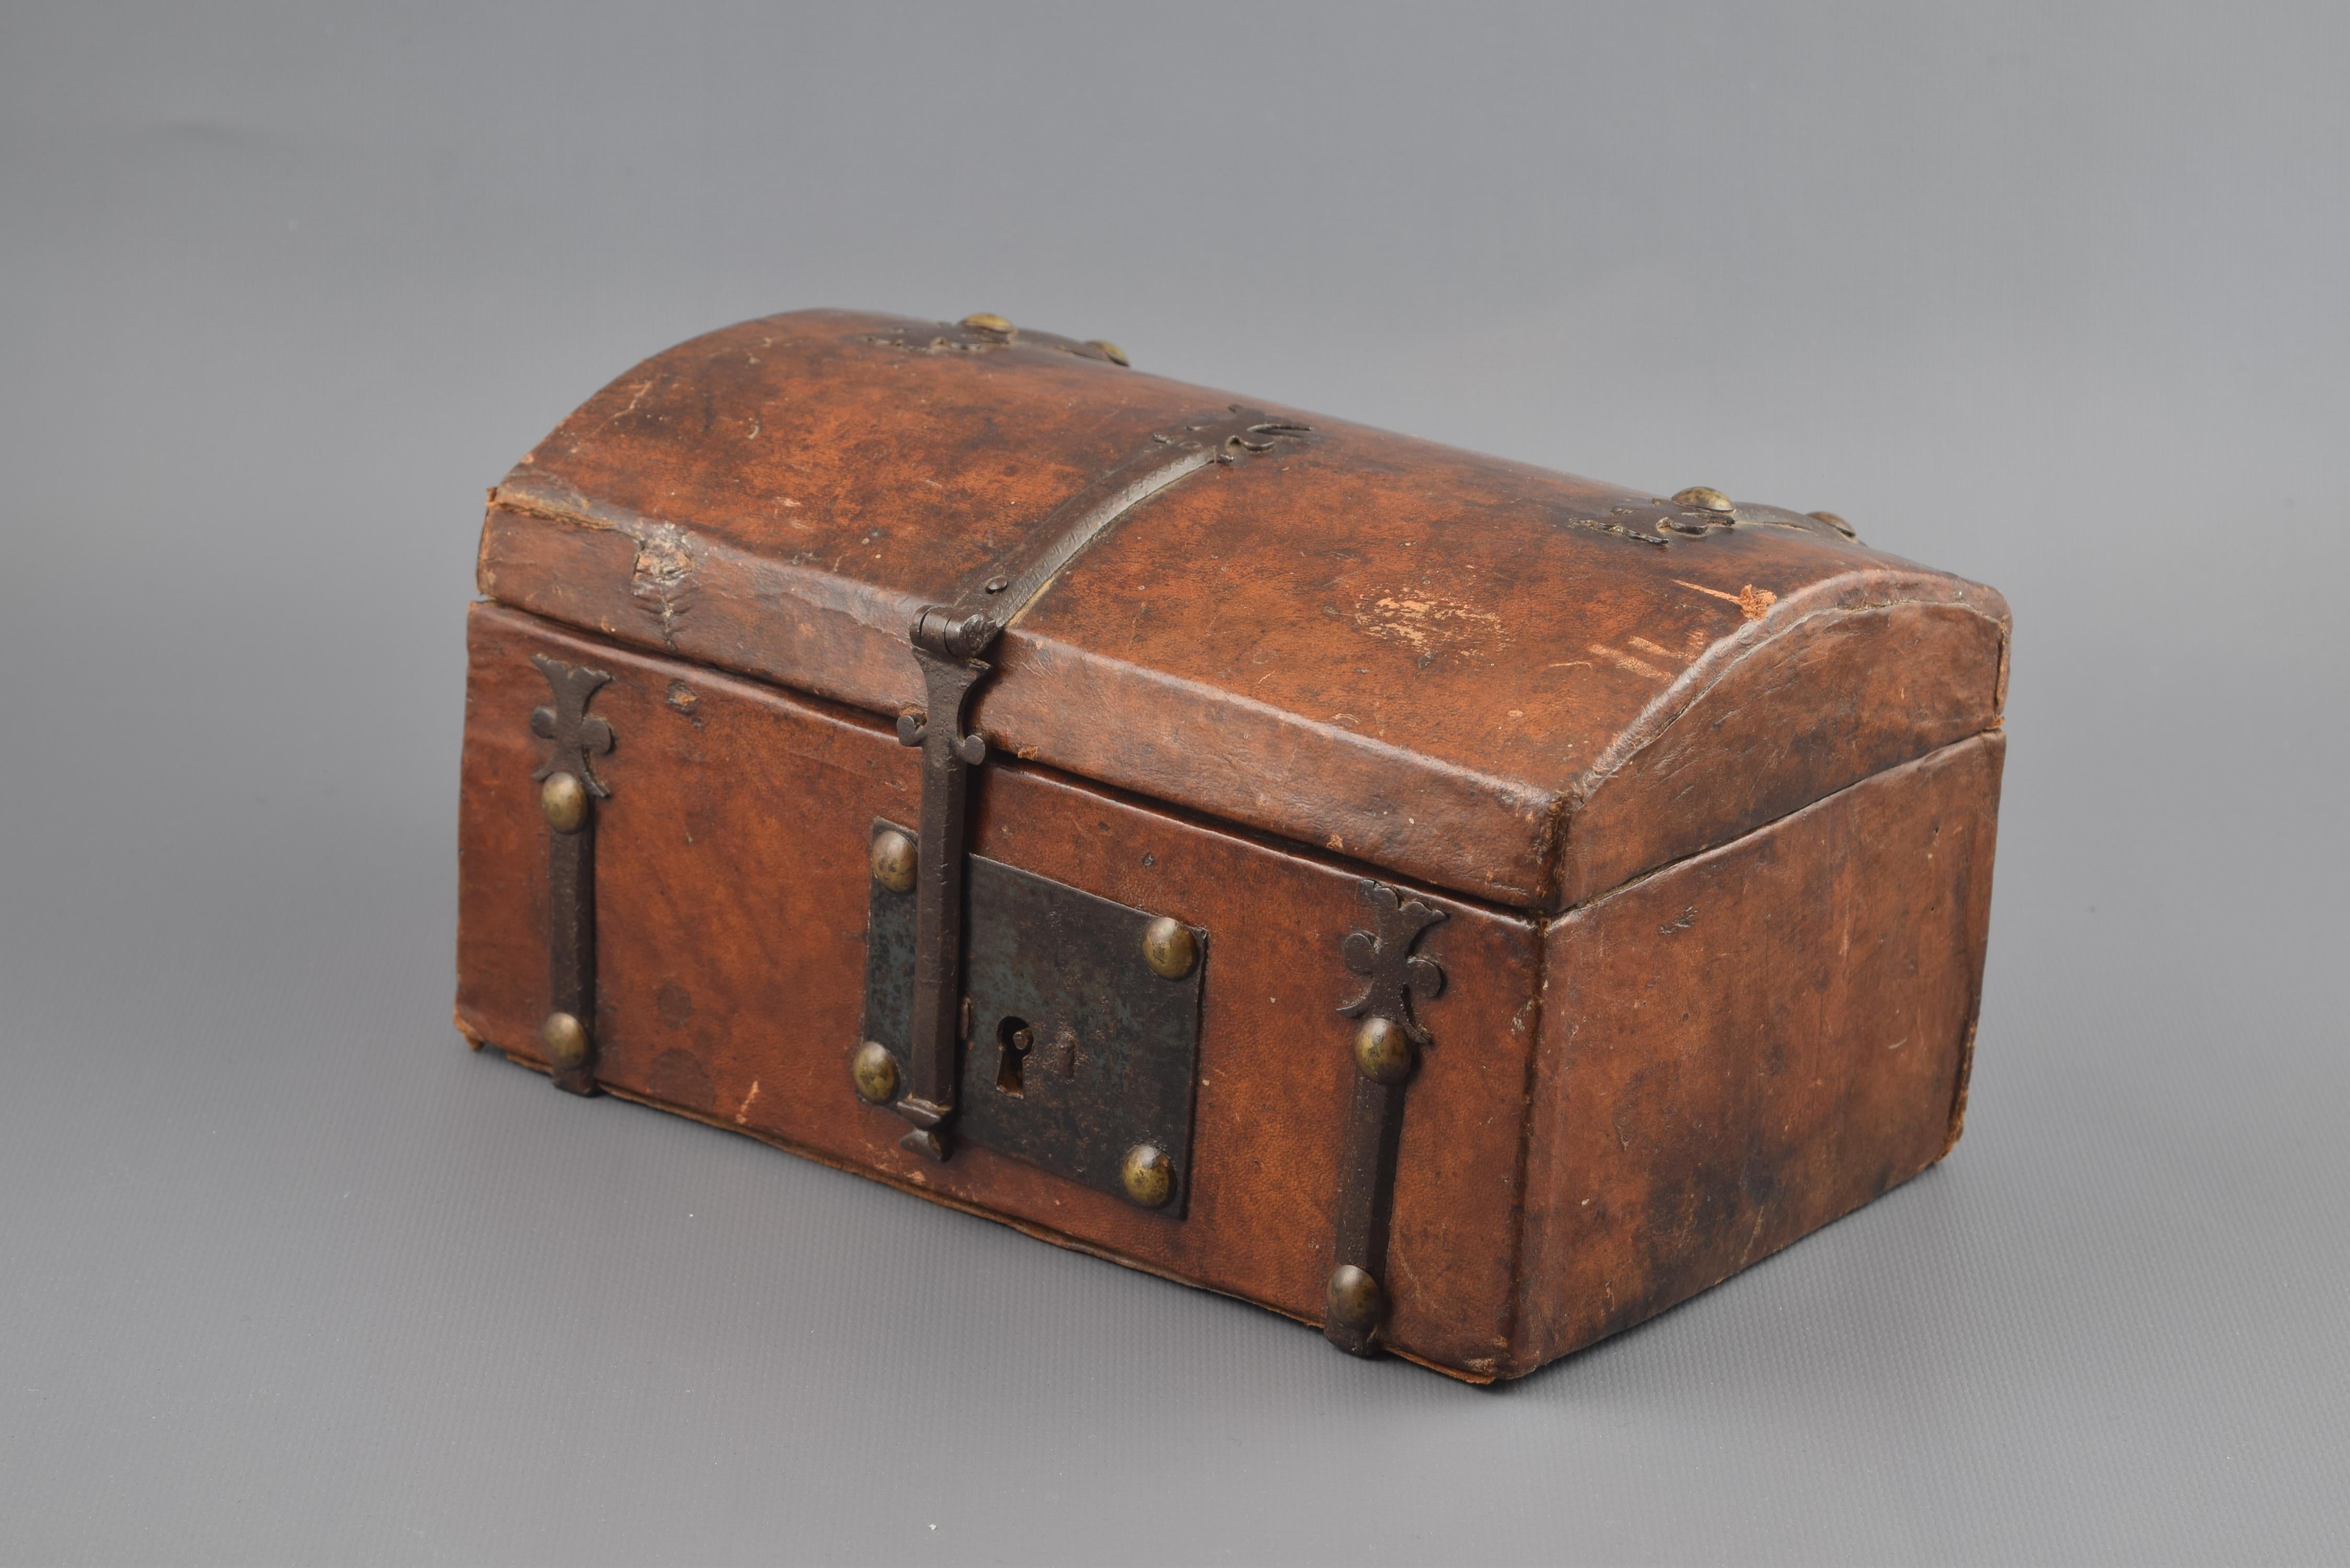 Wooden Chest, Leather and Metal, 17th Century (Barock)